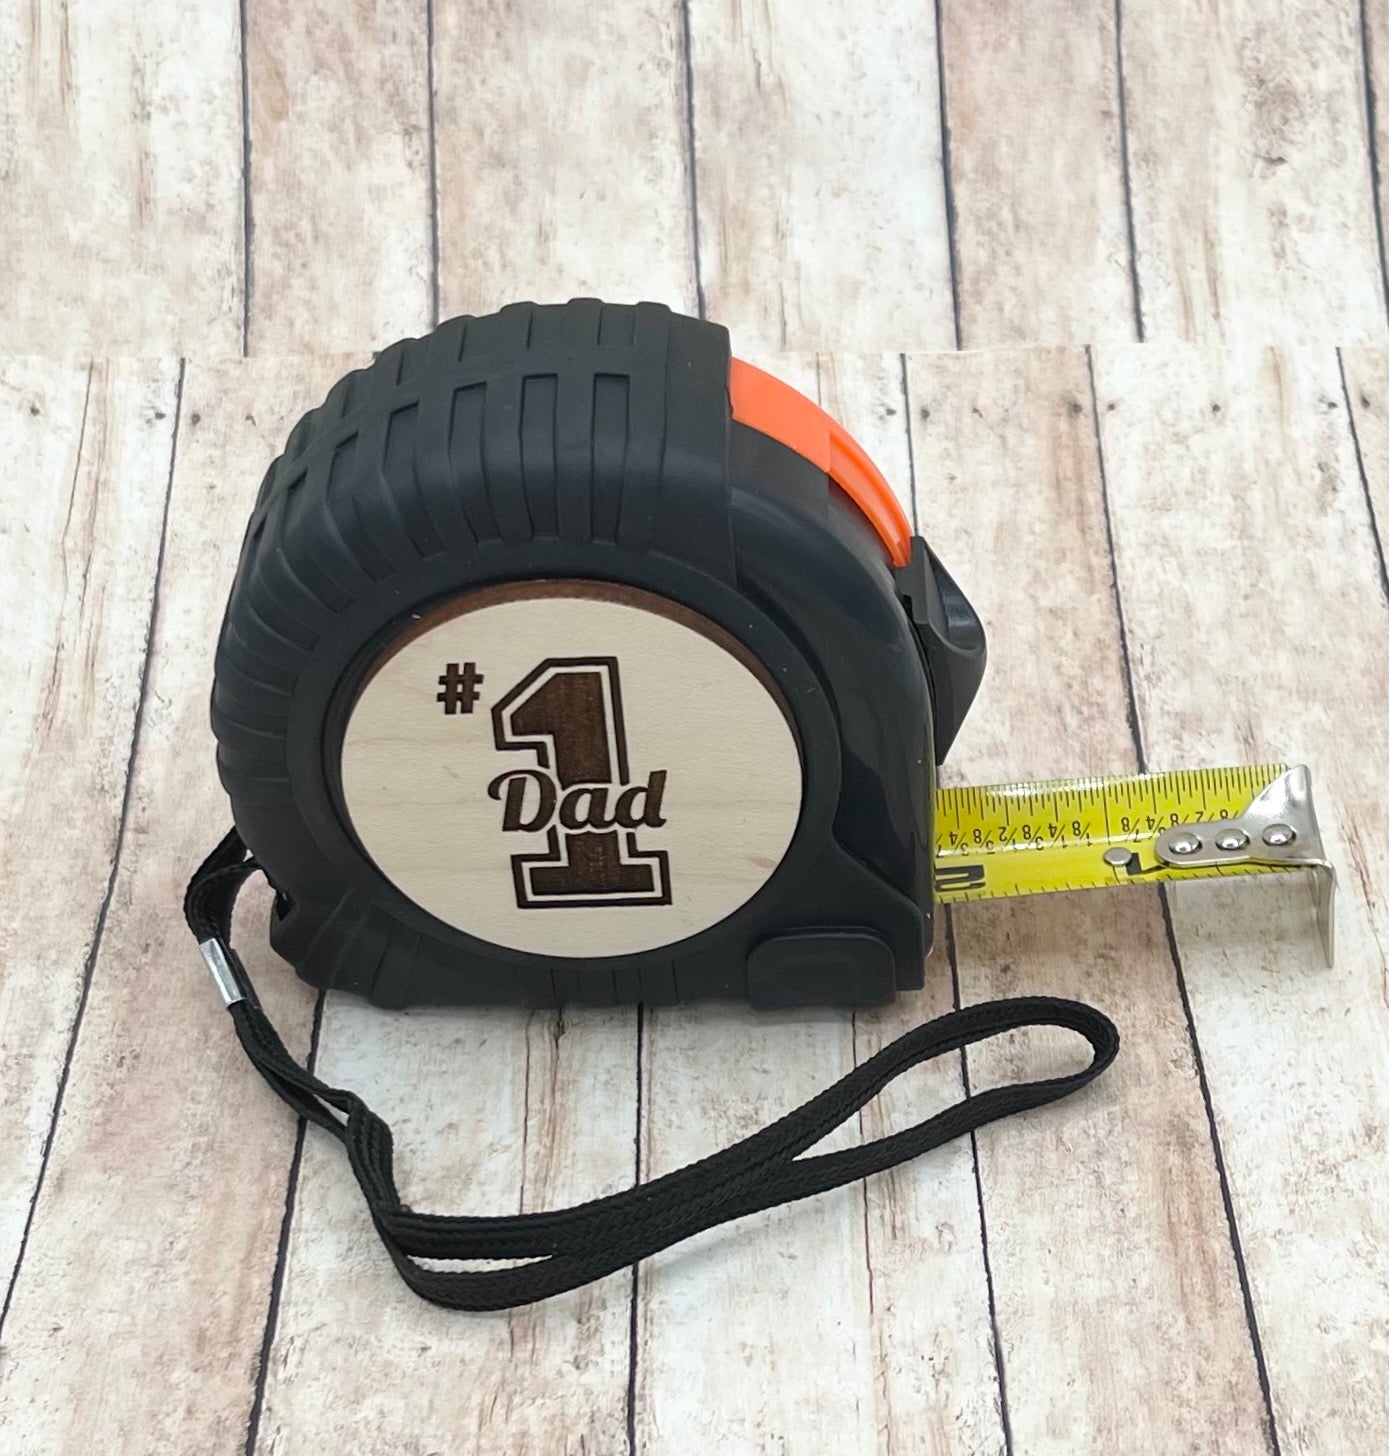 Personalized Tape Measure 9 Feet Employee Gift Personalized Small